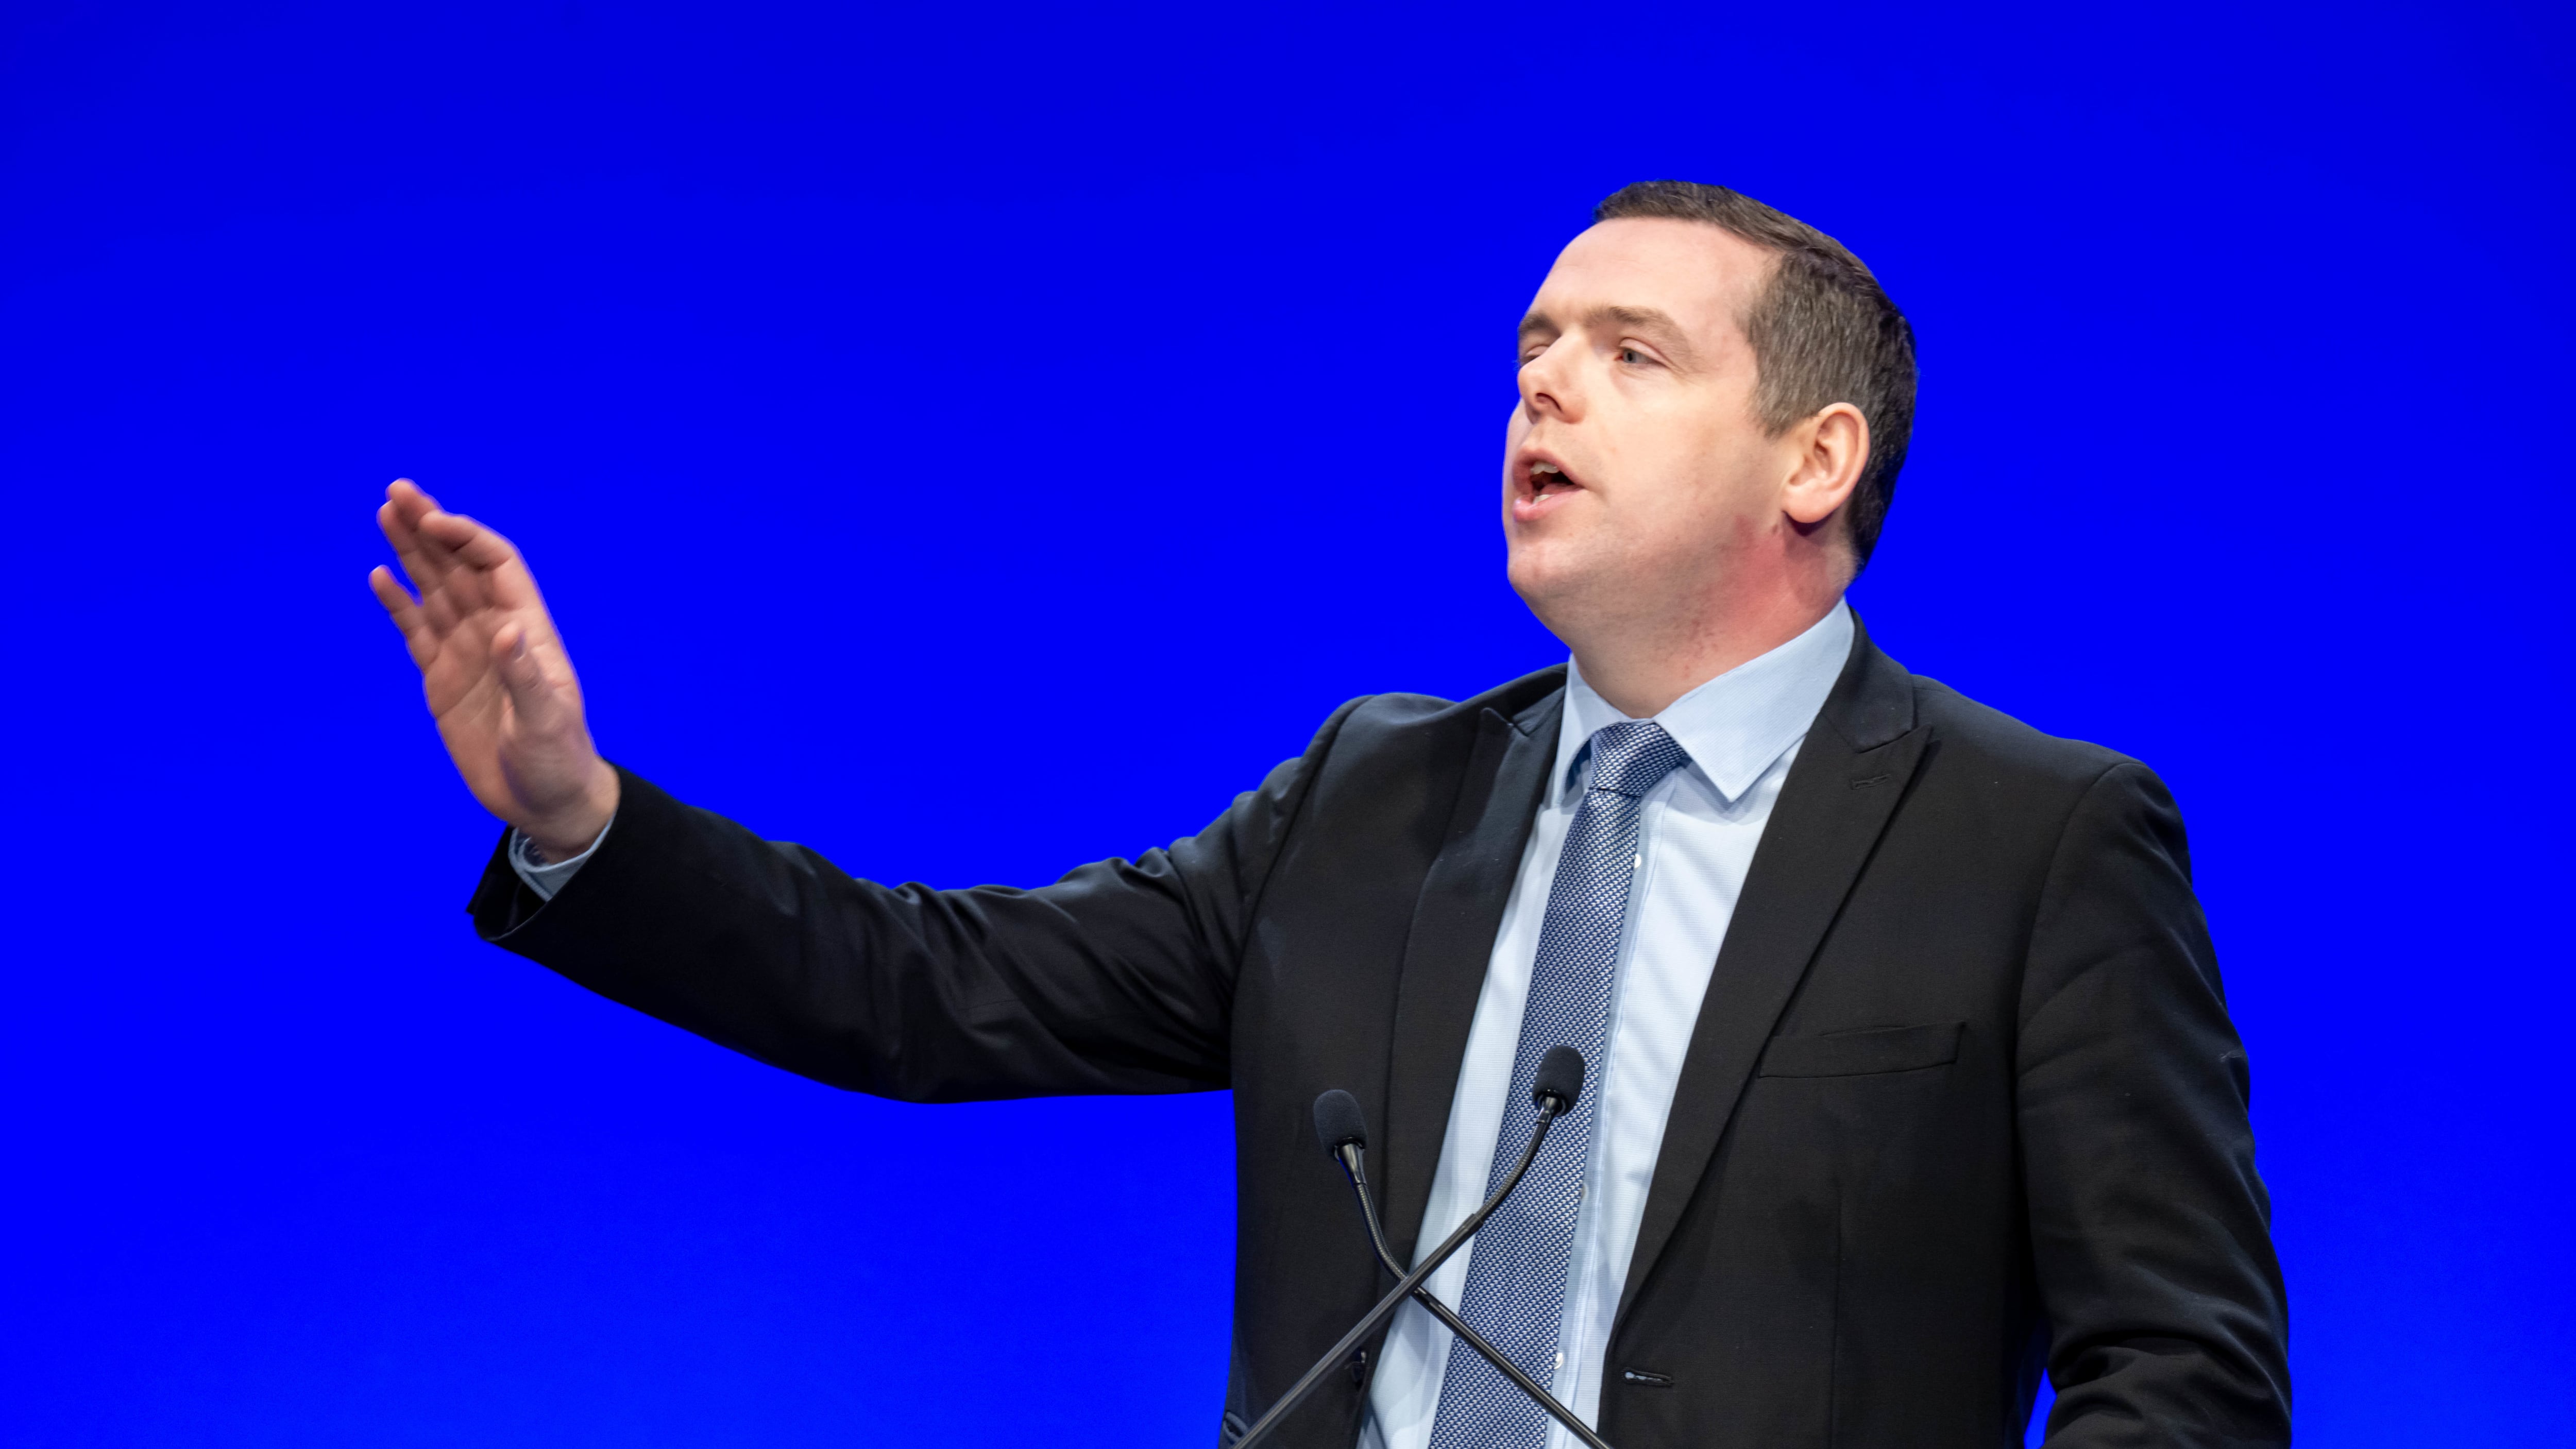 Scottish Conservative leader Douglas Ross is to stand in the Aberdeenshire North and Moray East seat on July 4